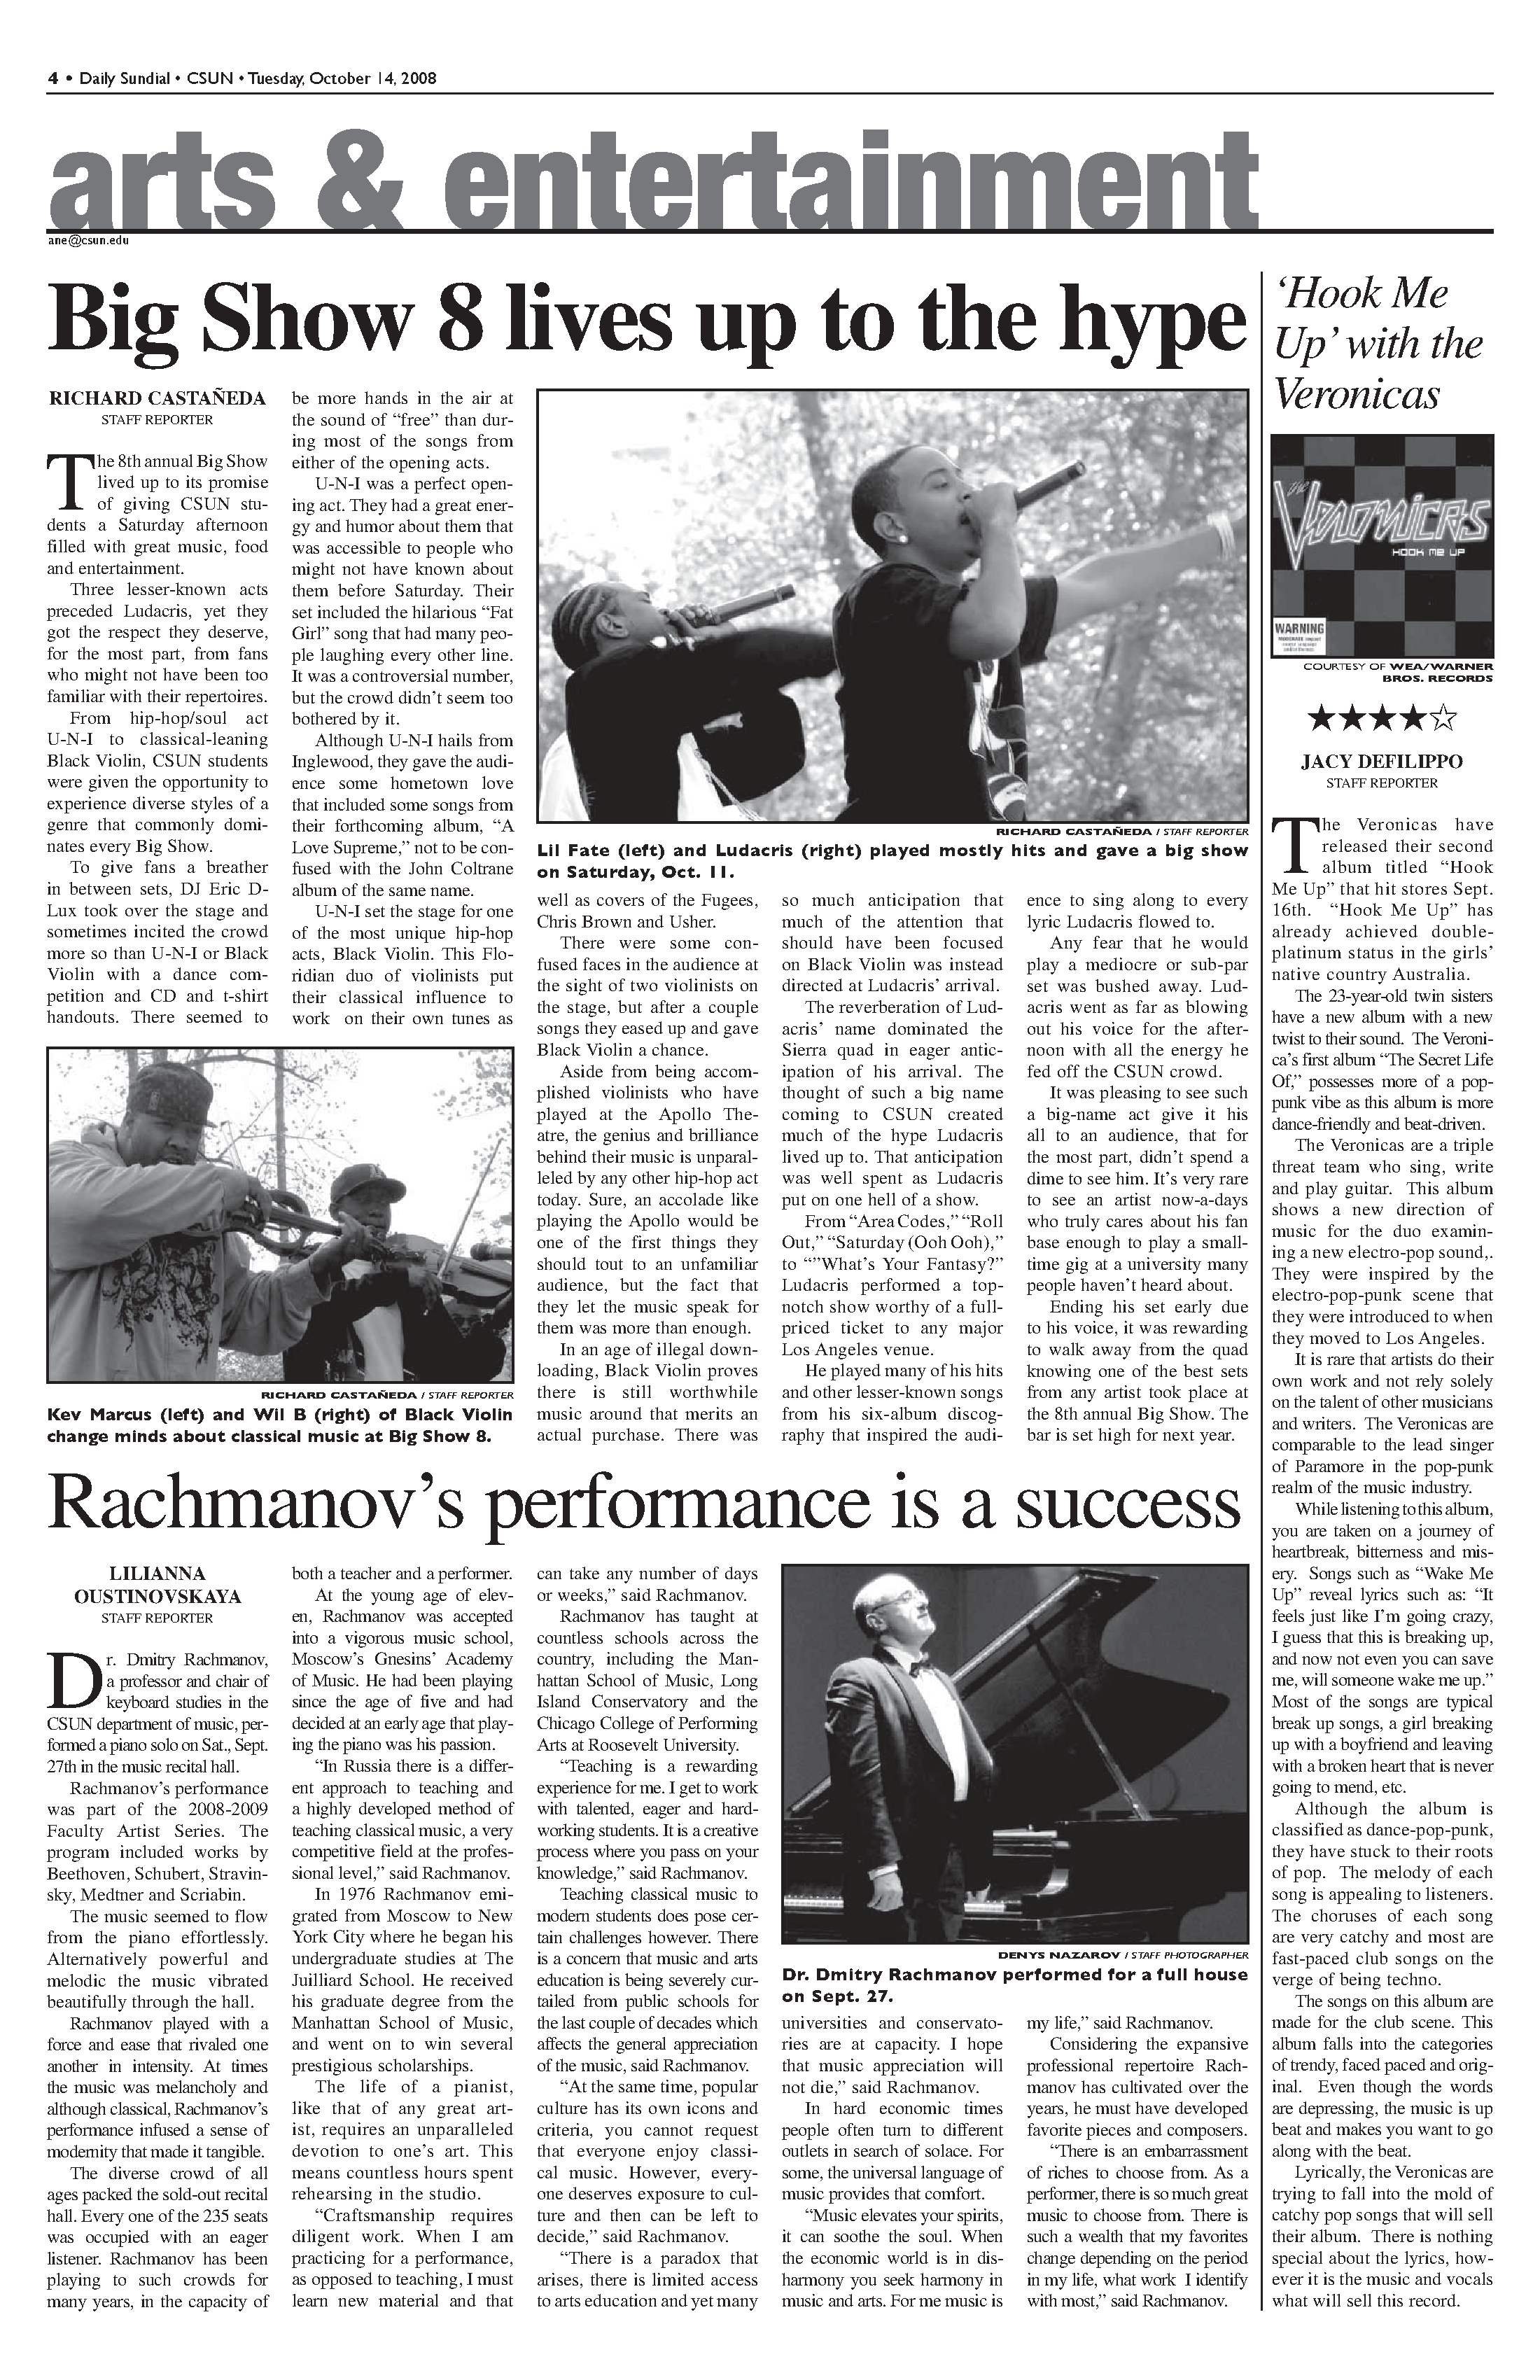 The Arts and Entertainment page of the Daily Sundial after the 2008 Big Show featuring Ludacris.